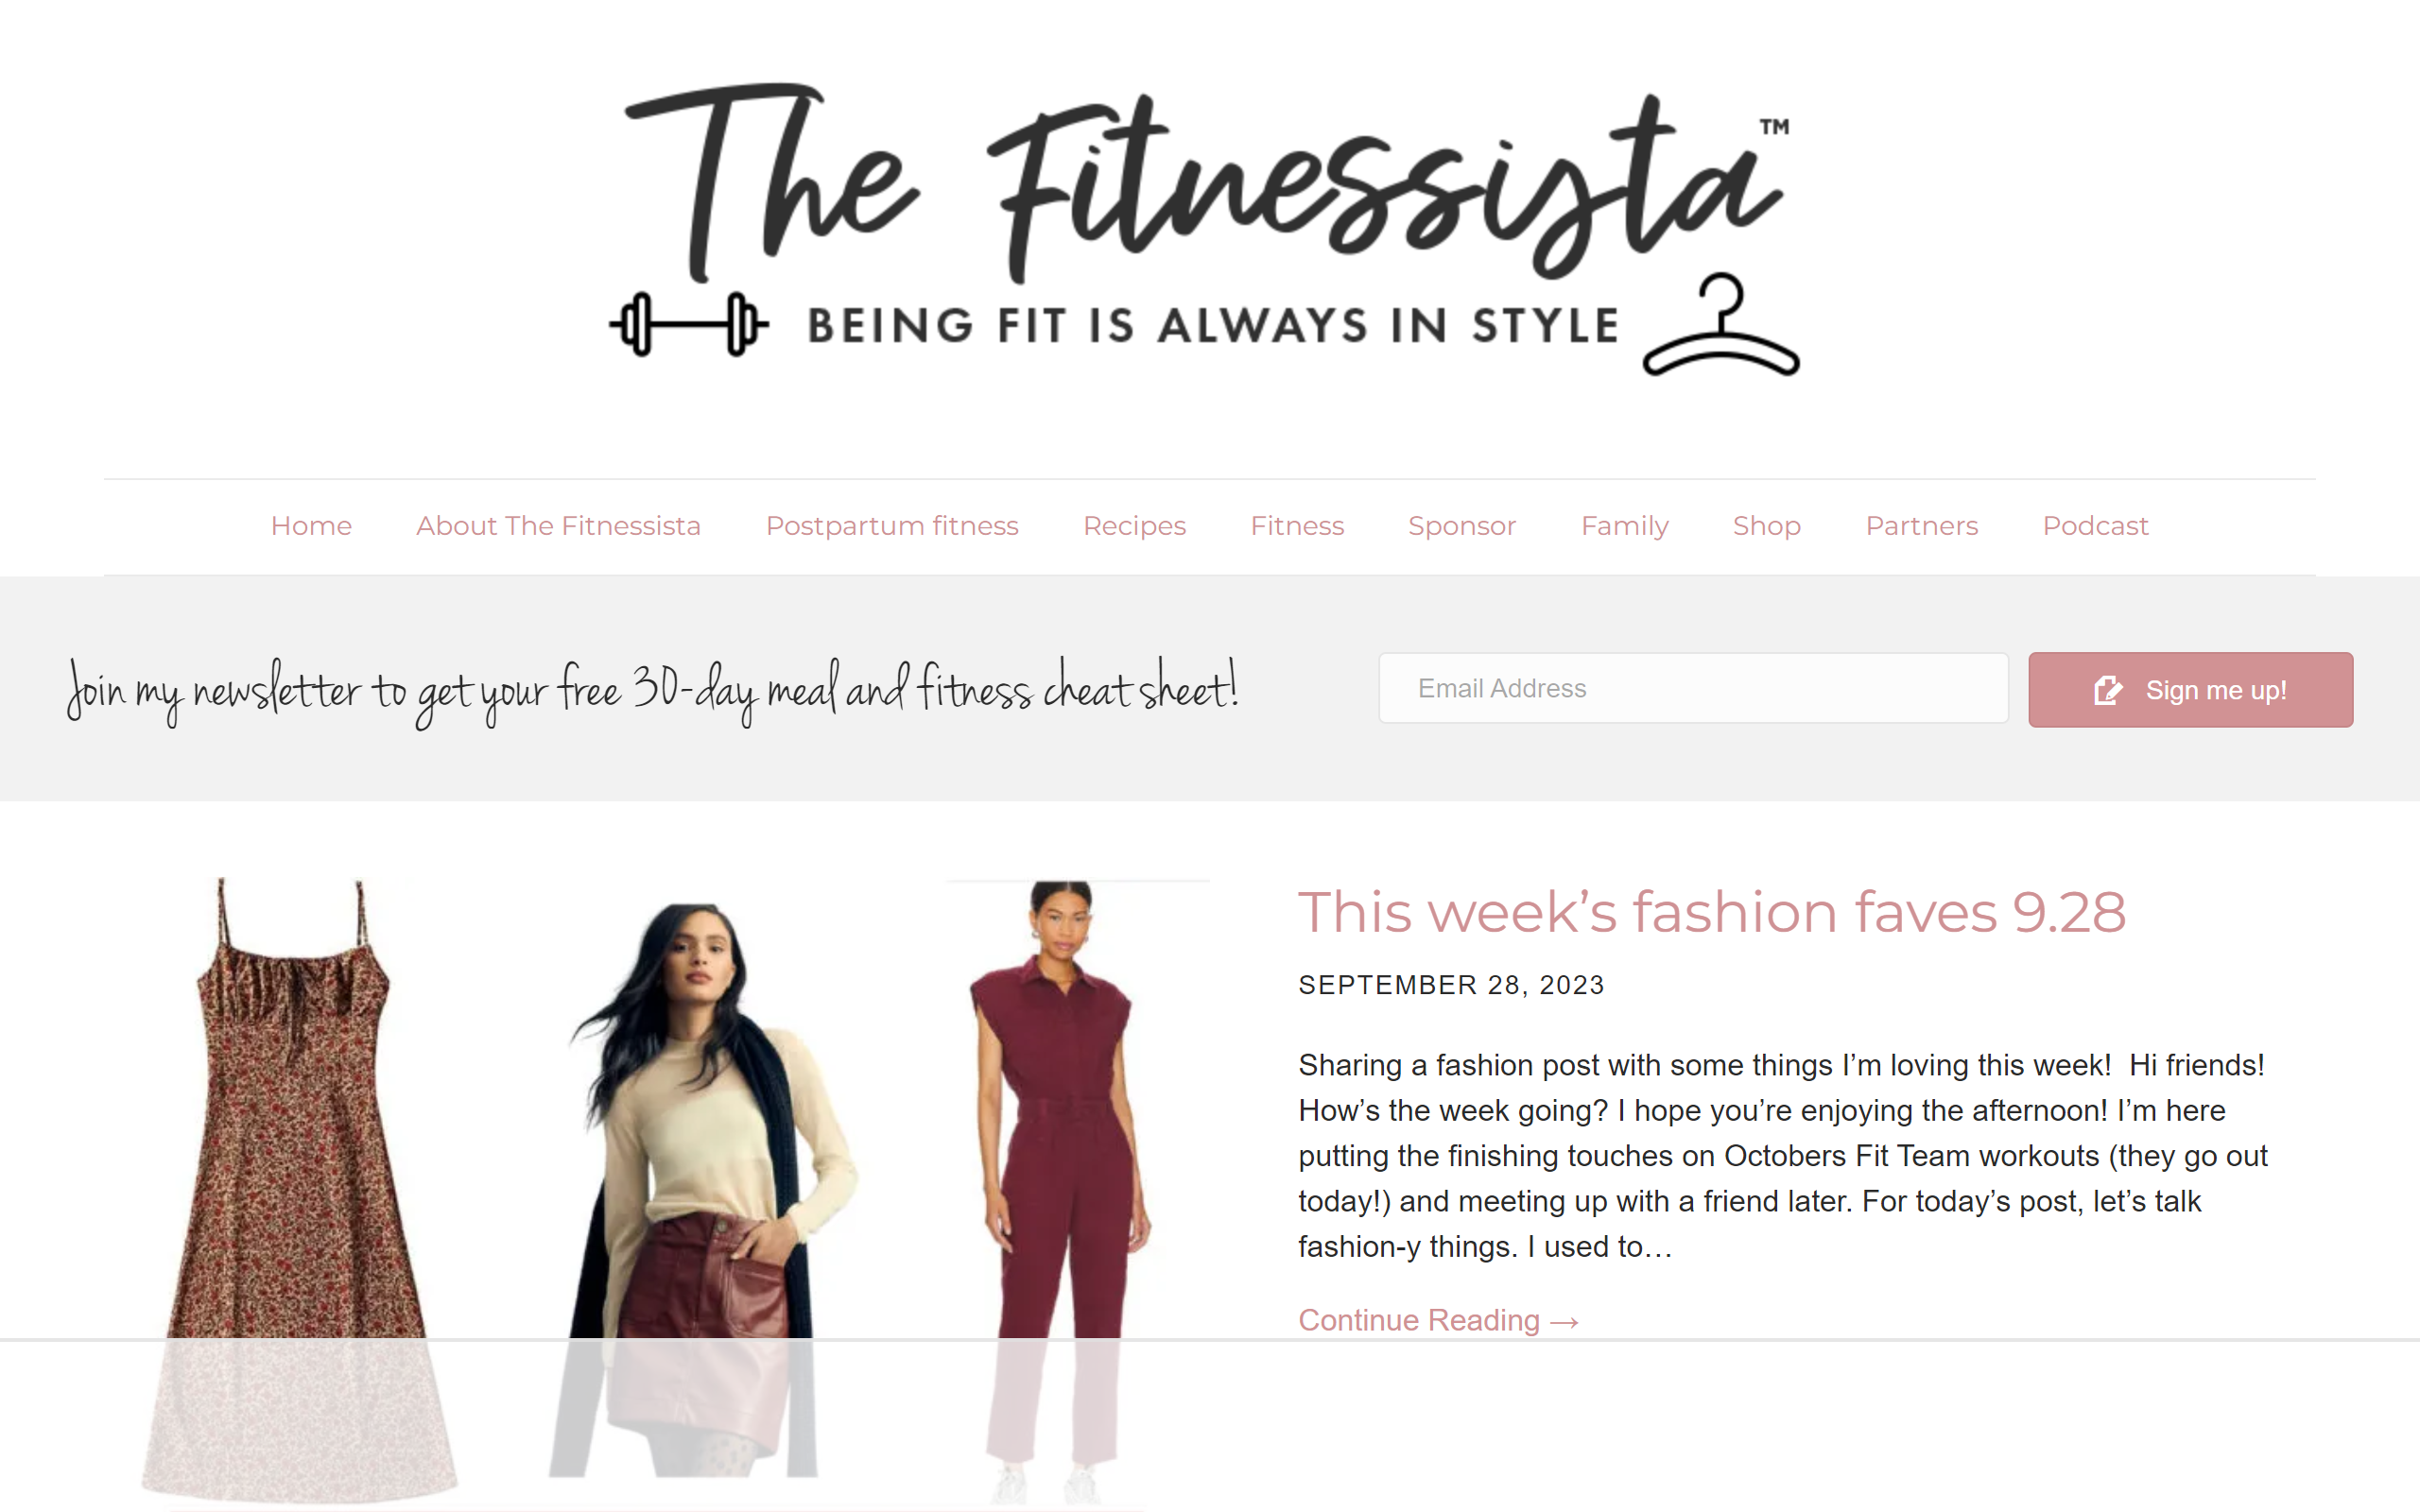 2023 Fitness and Health Gift Guide - The Fitnessista